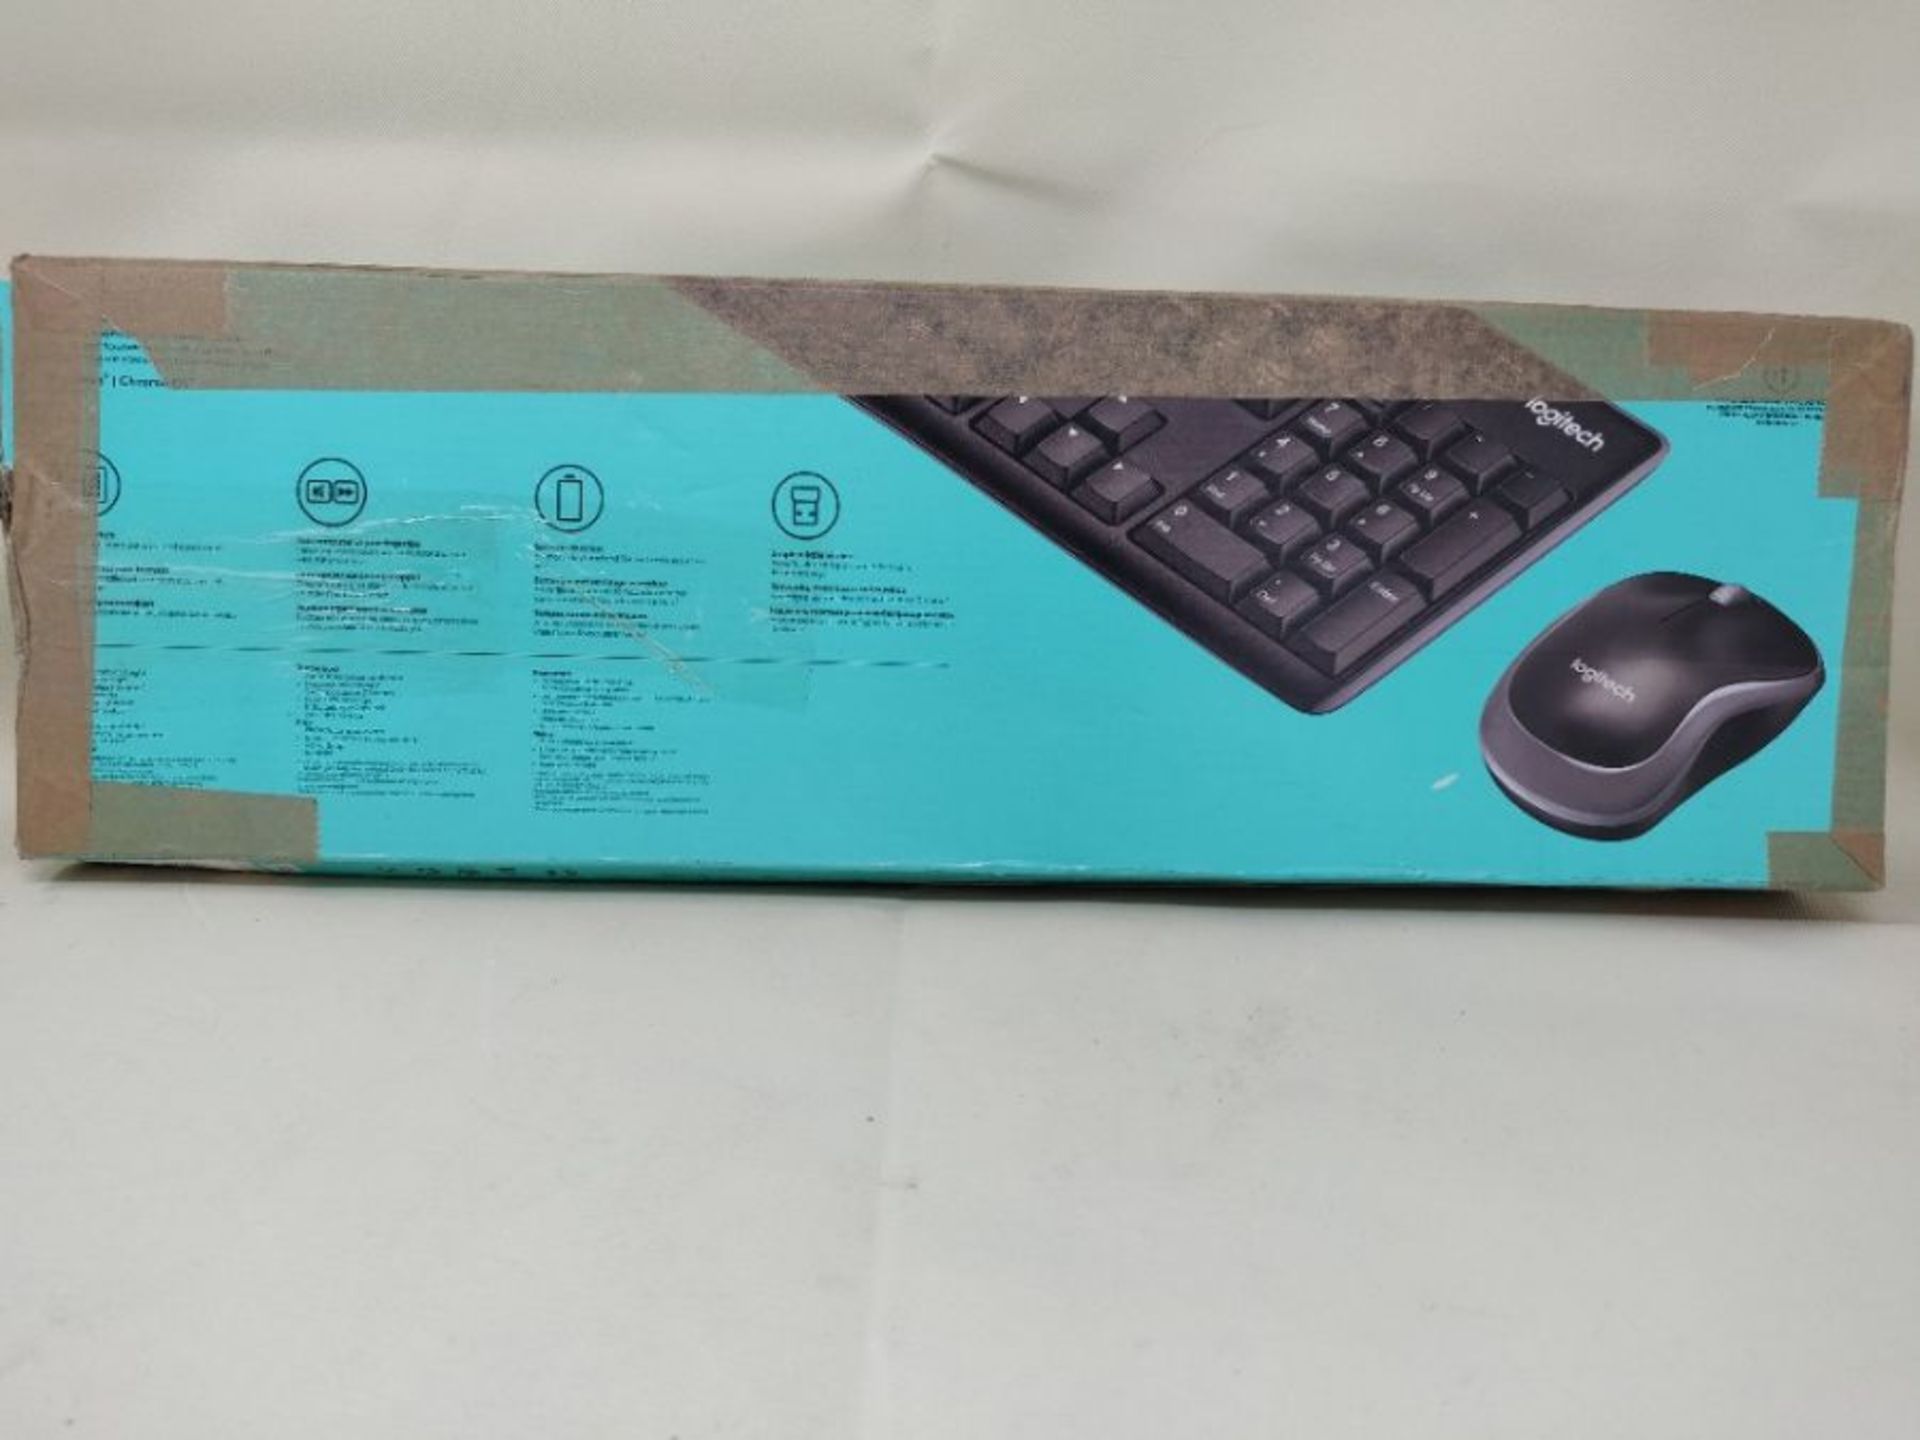 Logitech MK270 Wireless Keyboard and Mouse Combo for Windows, 2.4 GHz Wireless, Compac - Image 2 of 3